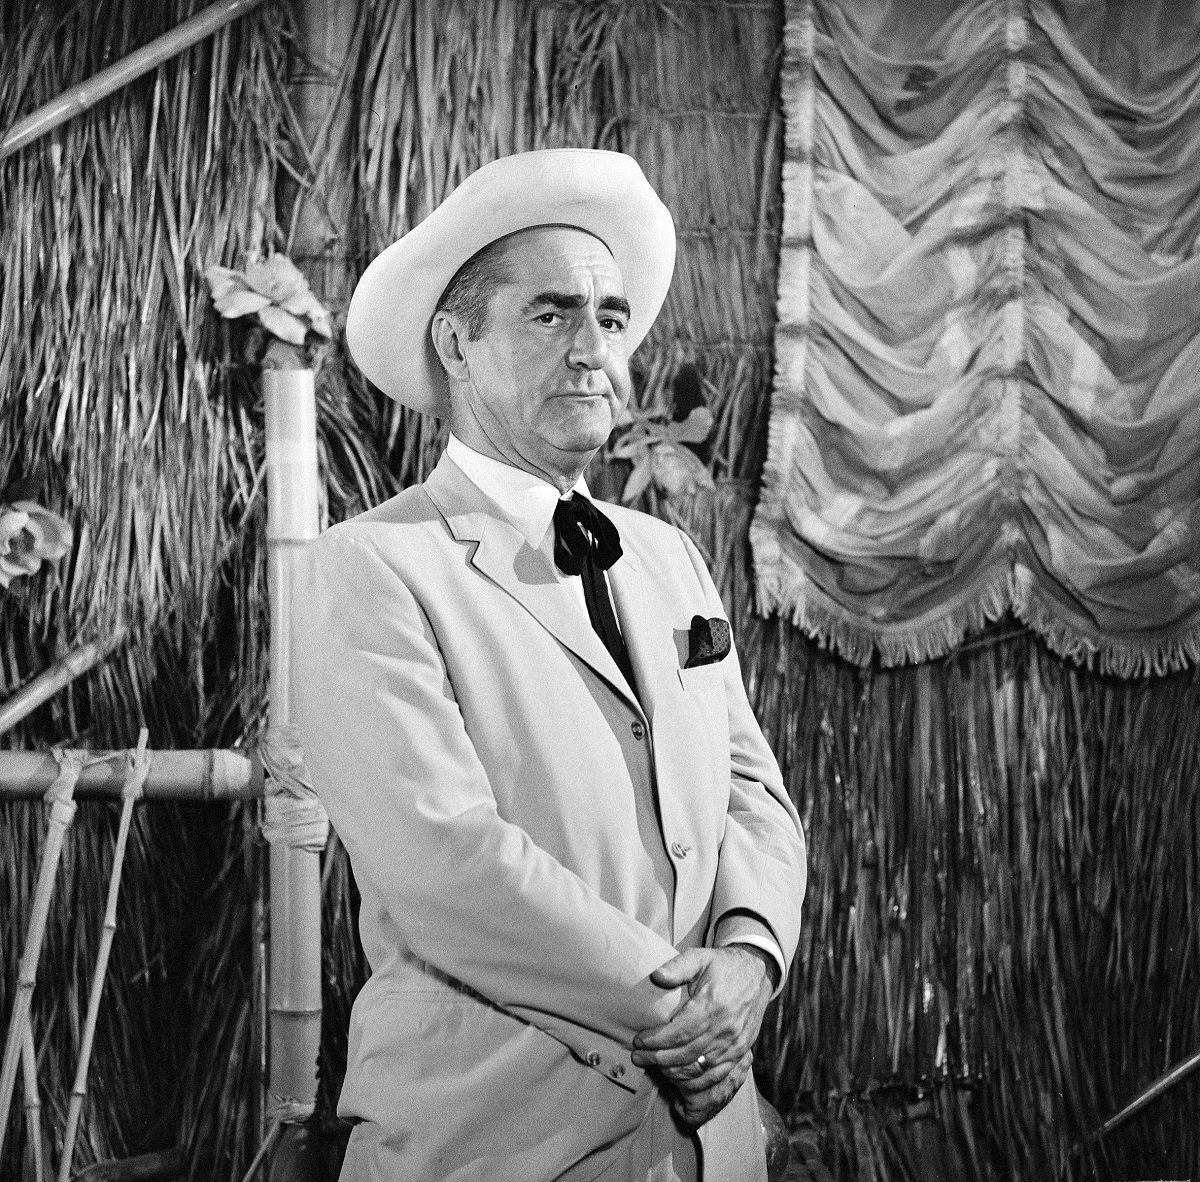 'Gilligan's Island' star Jim Backus wearing a suit and hat, standing in front of a bamboo hut.